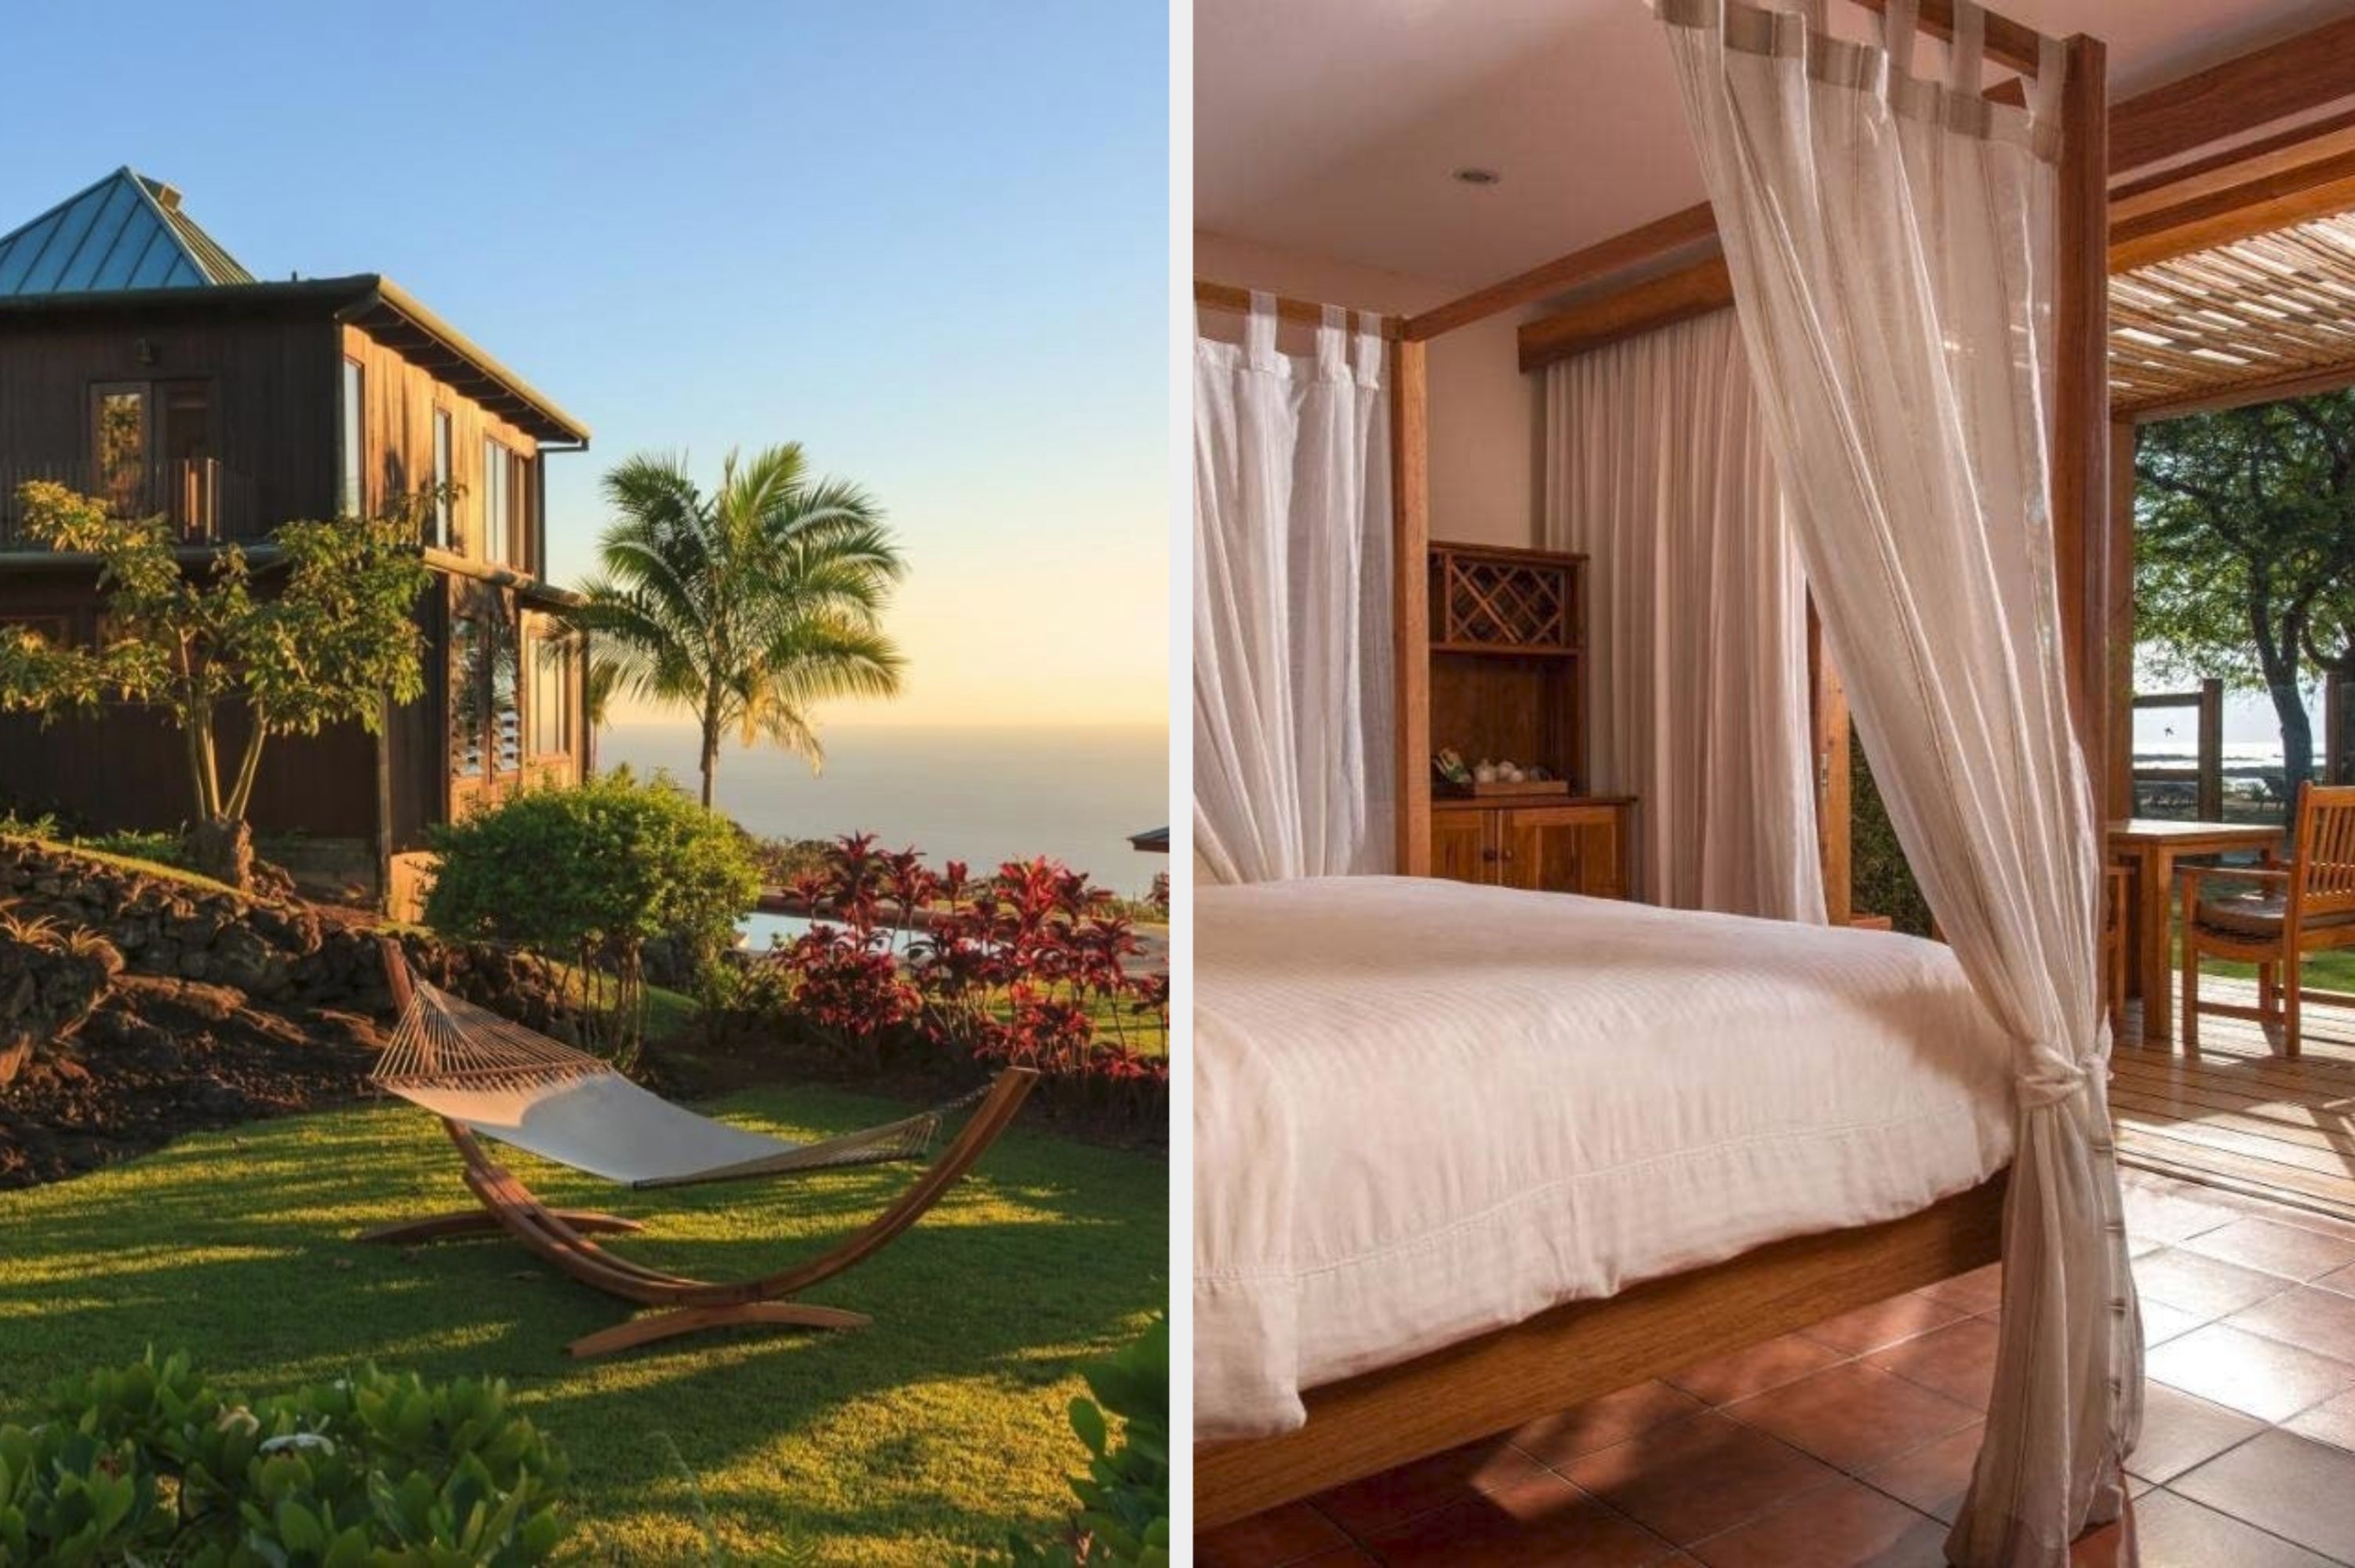 15 Hotels From Booking.com You'll Want To Bookmark For Your Honeymoon